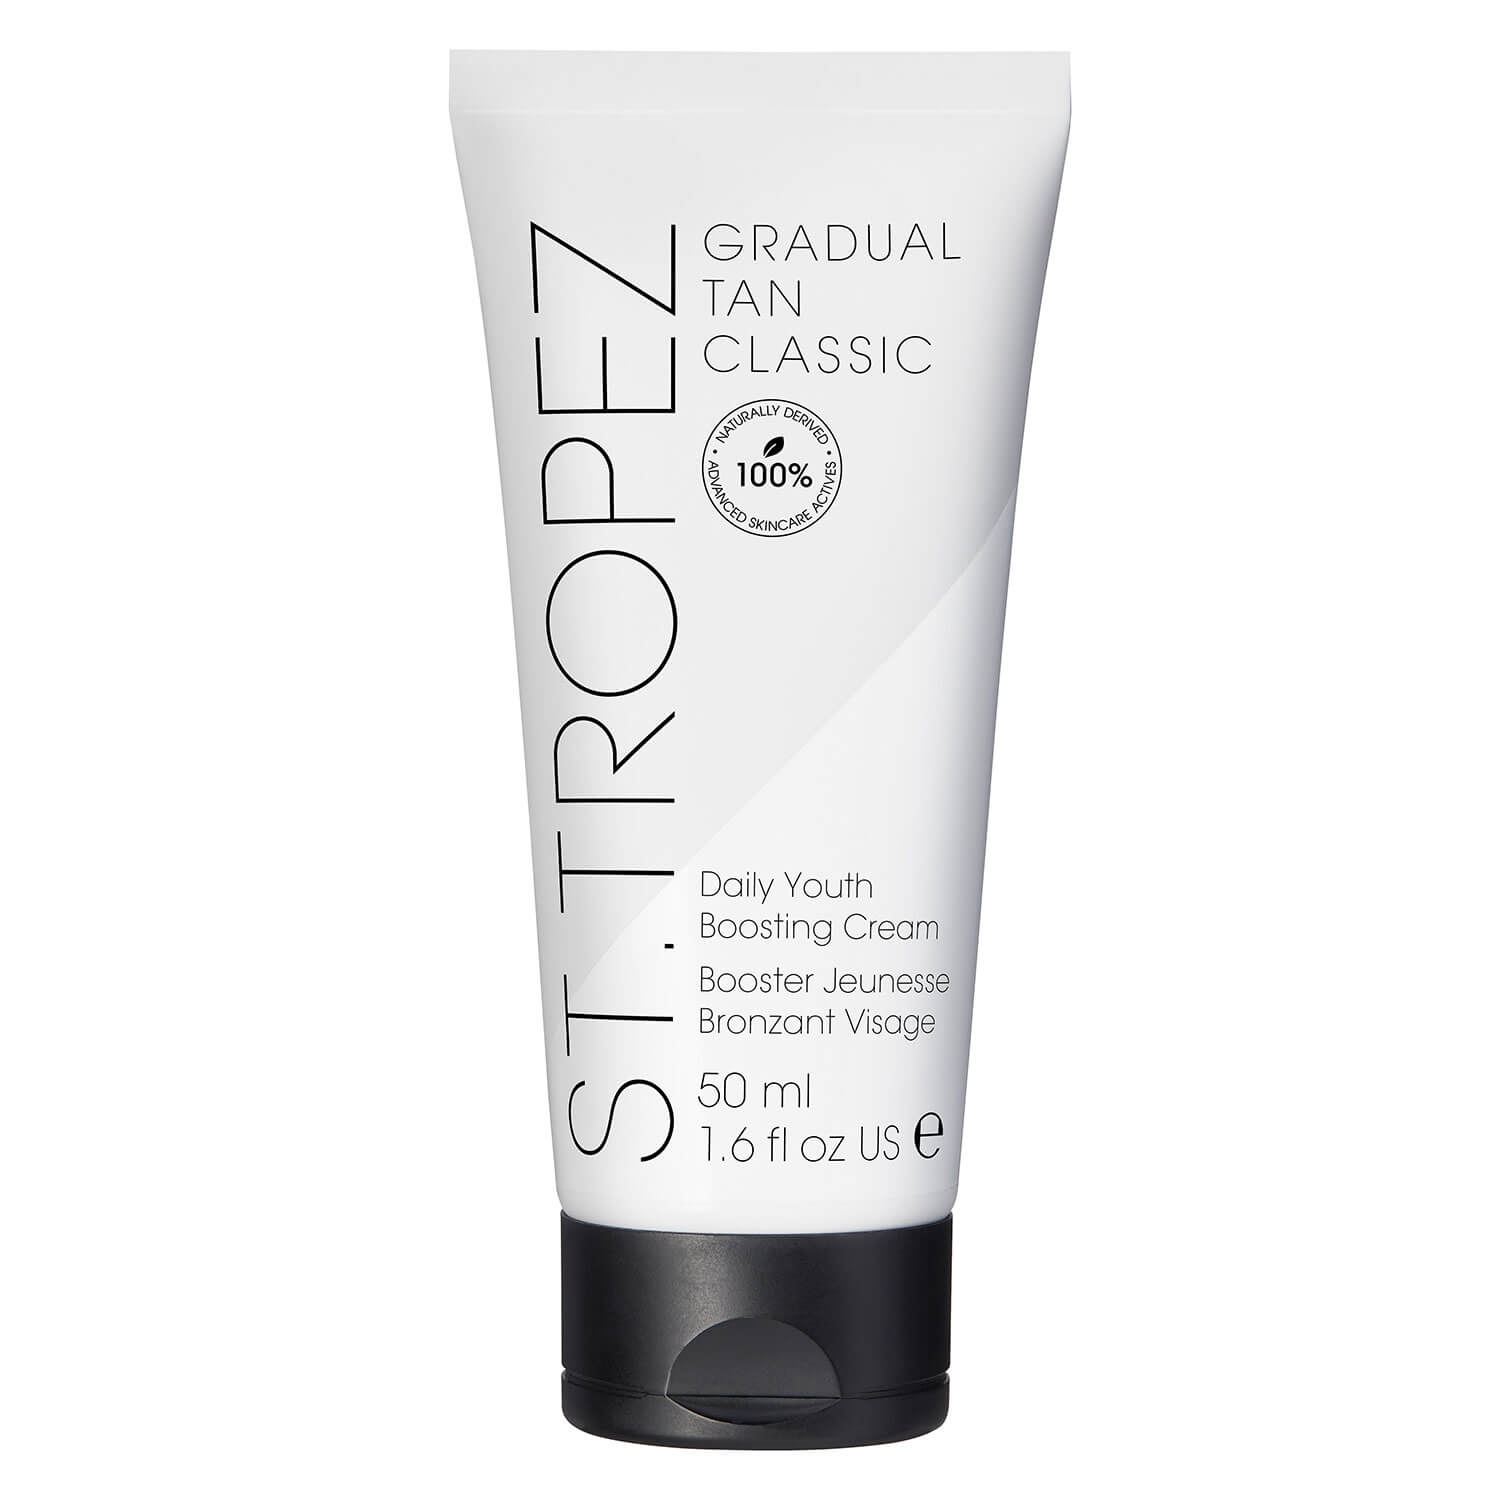 Product image from St.Tropez - Gradual Tan Classic Daily Youth Boosting Cream